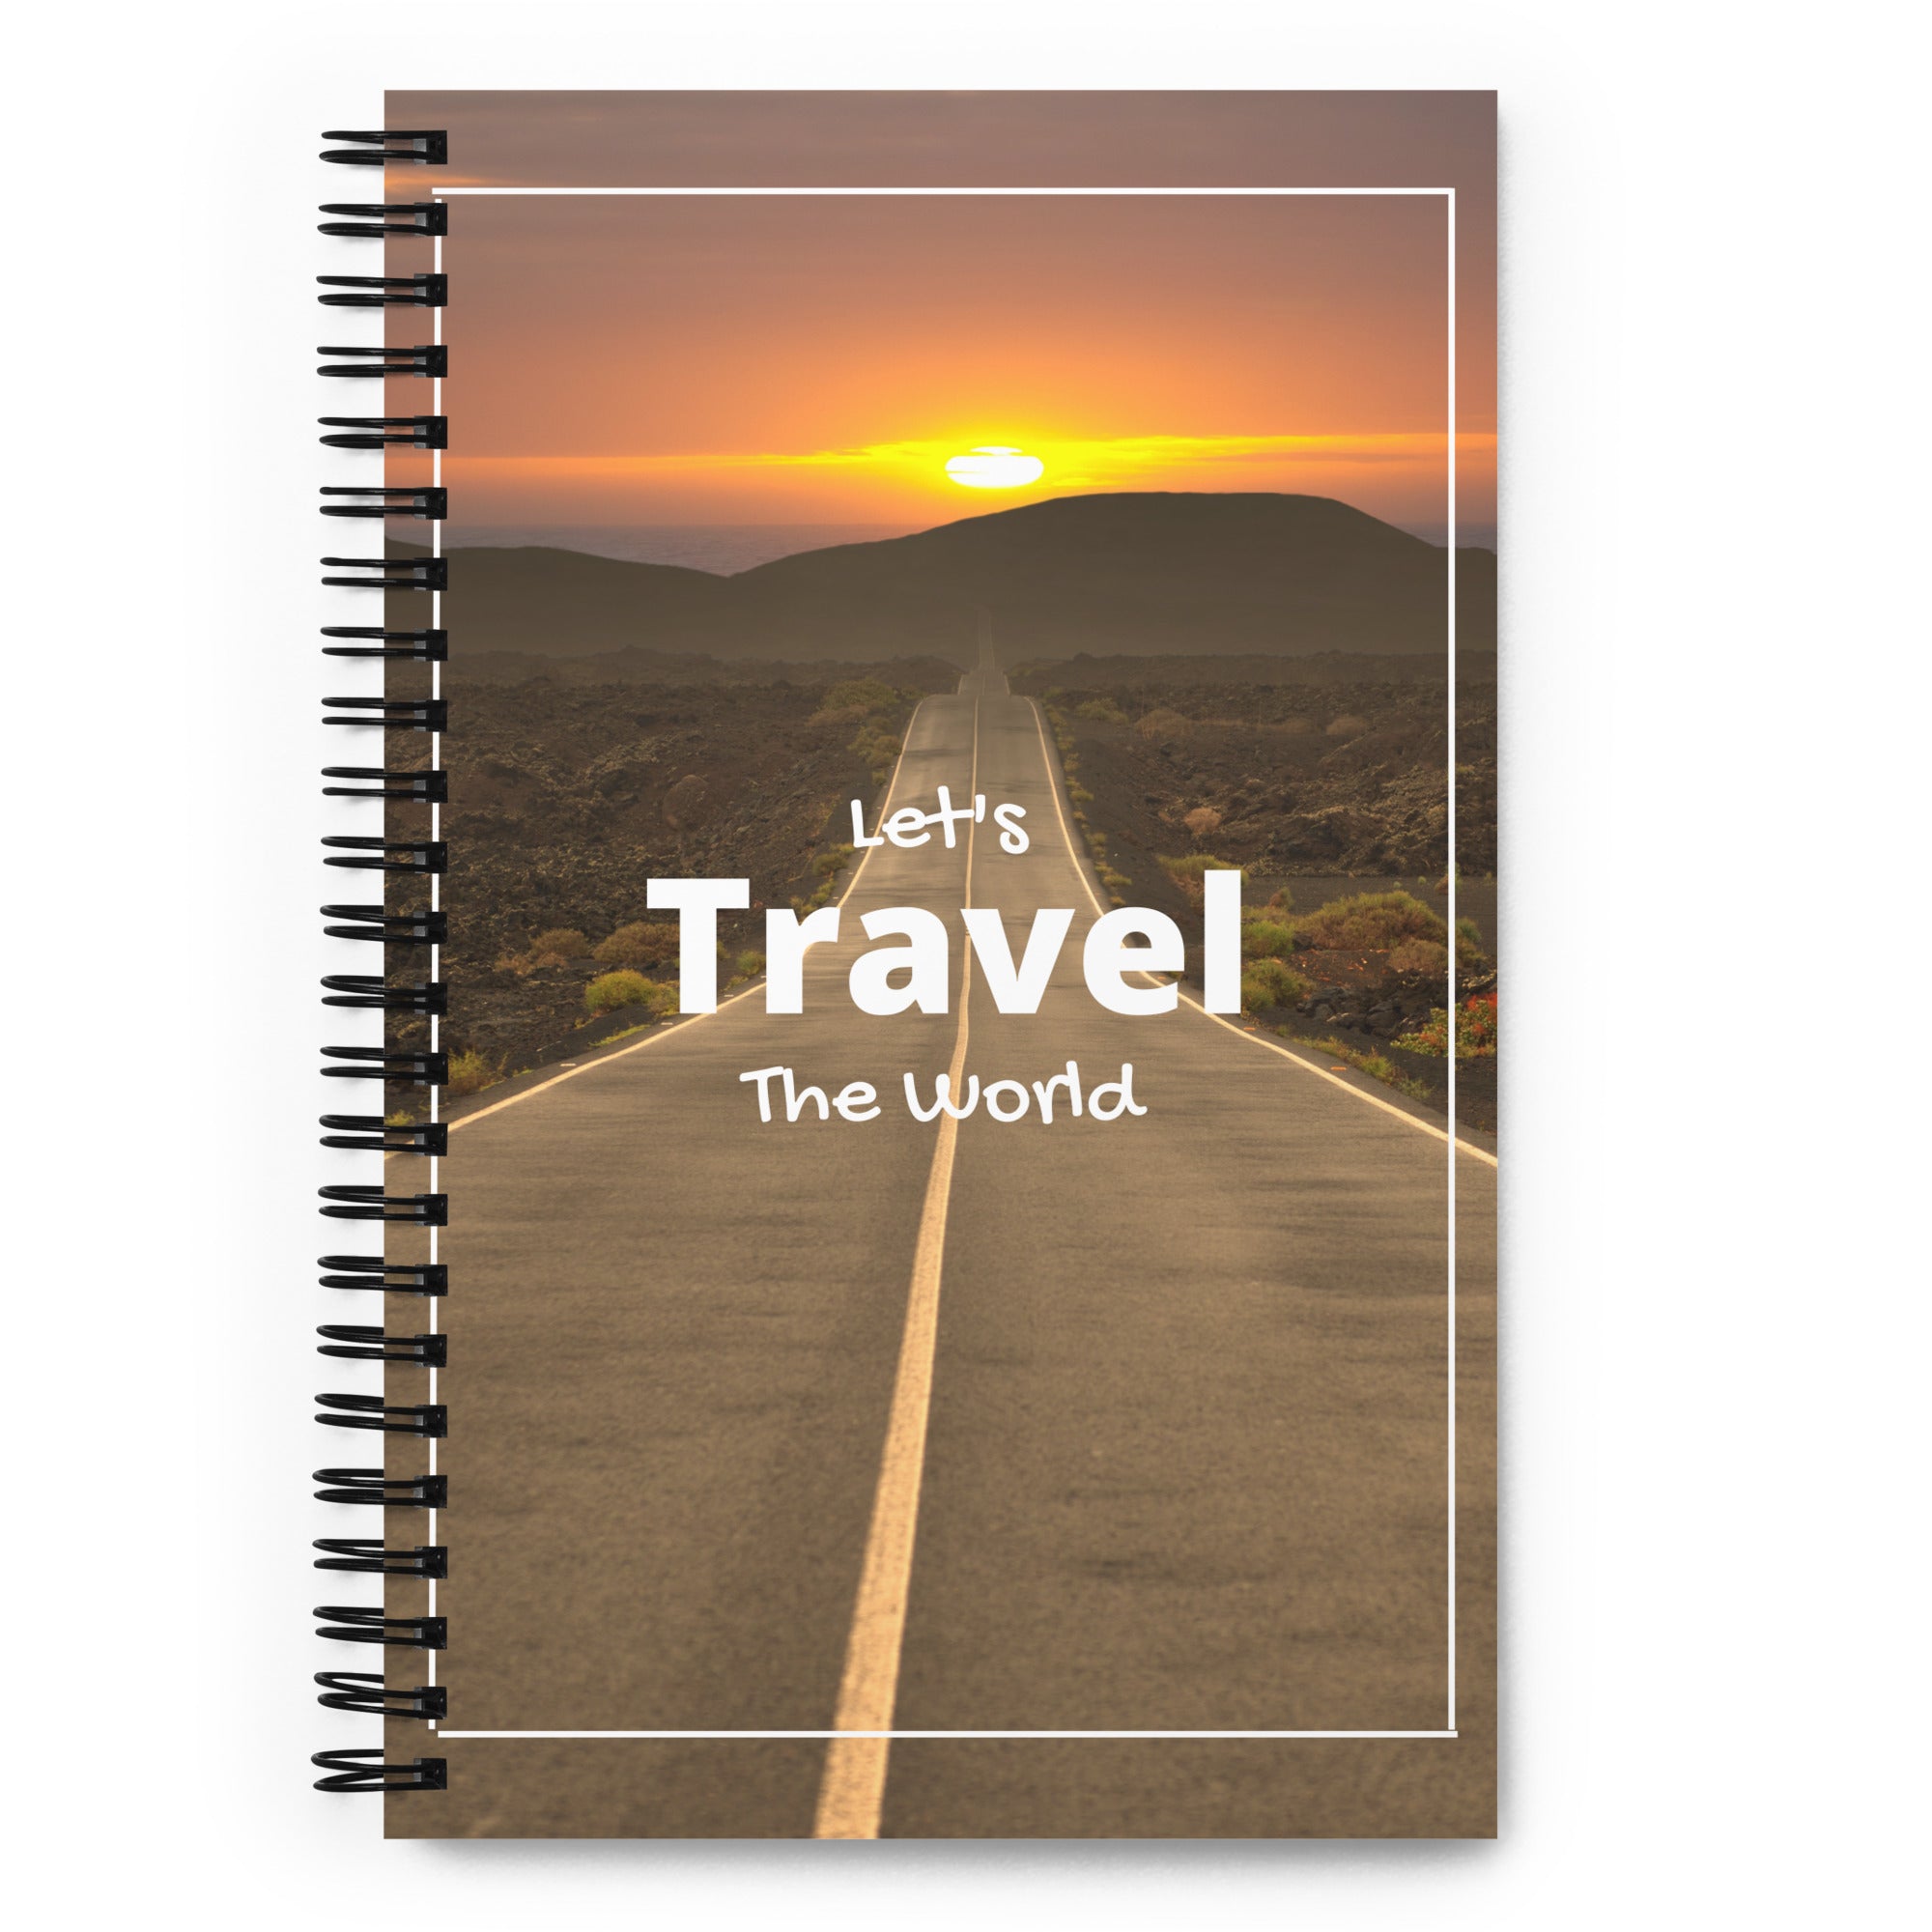 Let's Travel the World - Spiral Notebook